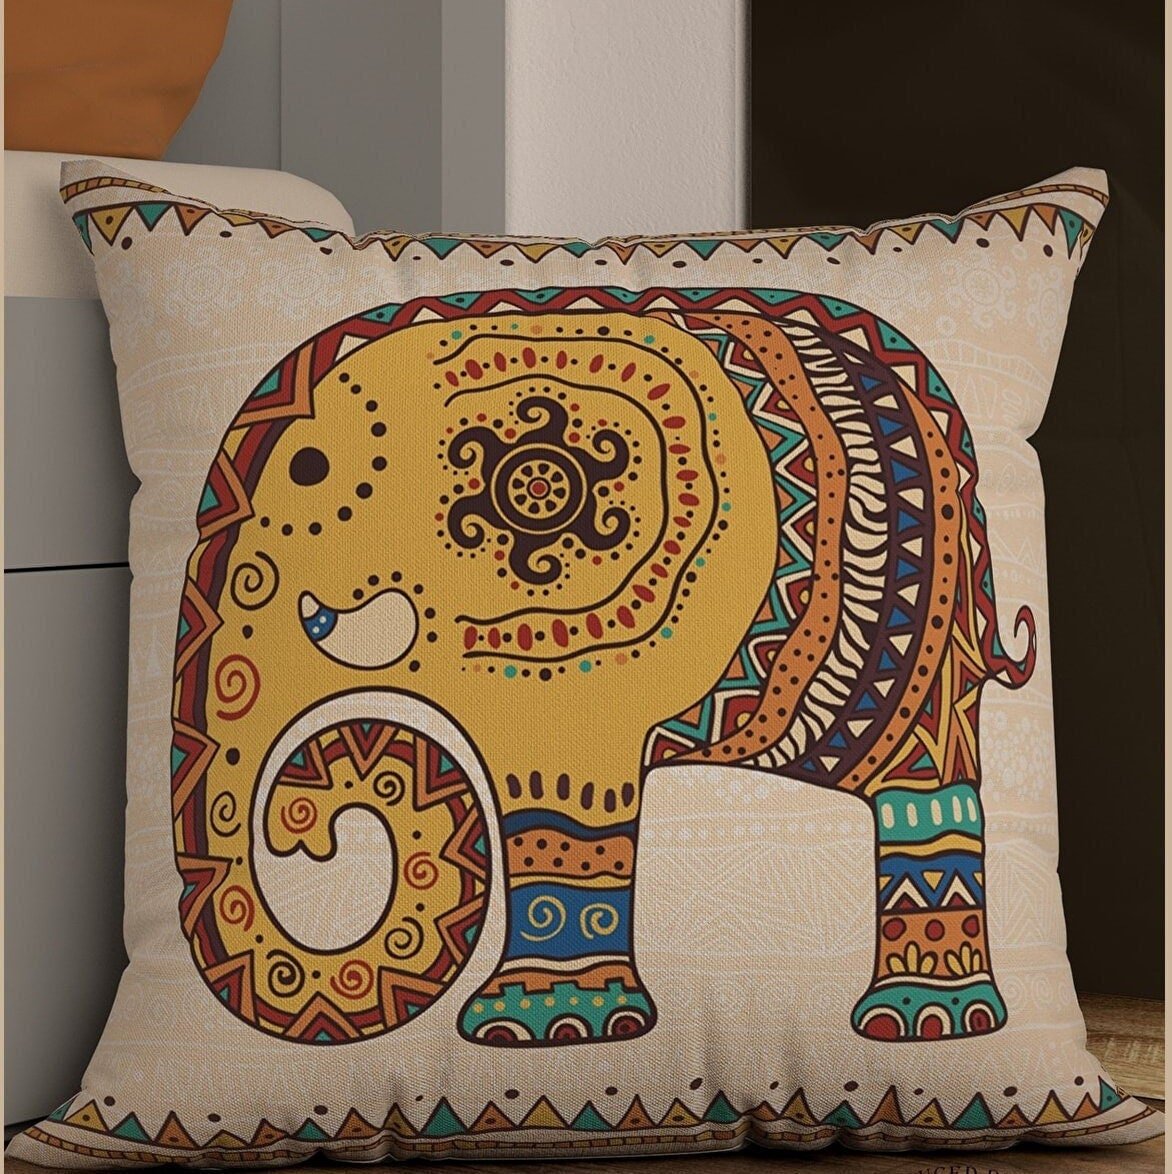 Ethnic Indian Embroidered Pillow Cover, Elephant Themed Home Decor, Elephant Pattern 3D Digital Printed Cushion Cover - 43x43 - Babila Home